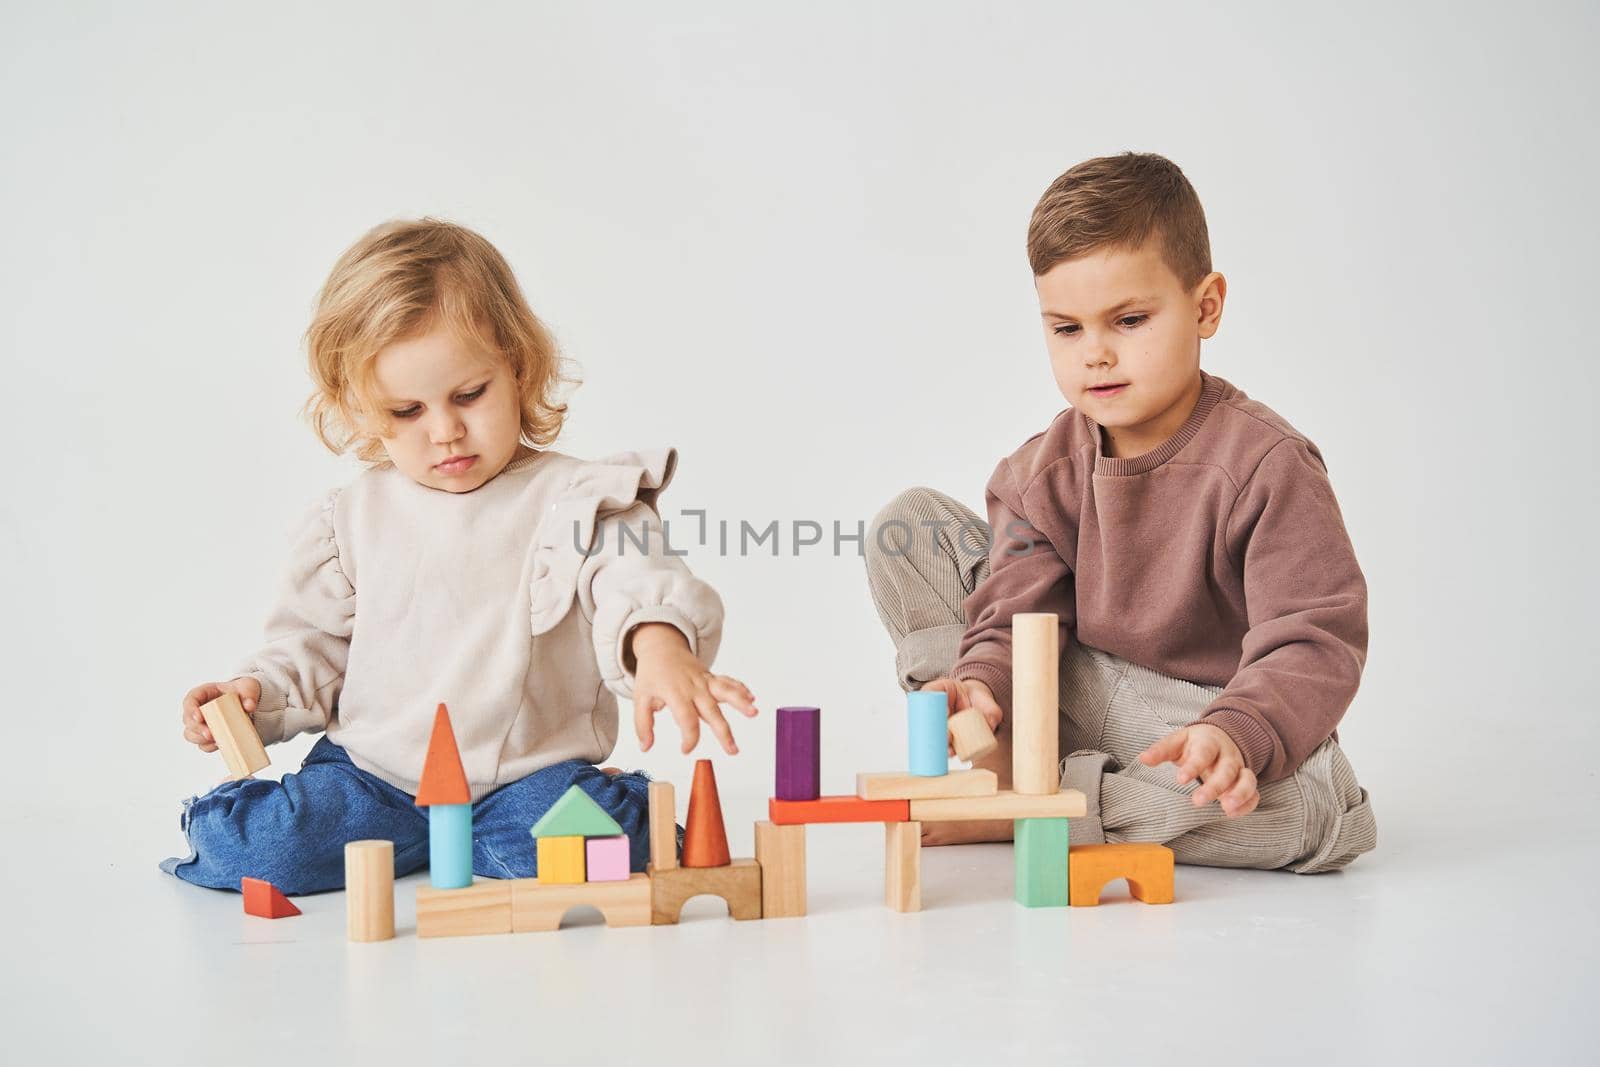 Child girl plays with cheerful kid with toy wooden cubes on white background. Children have smiling and have fun together